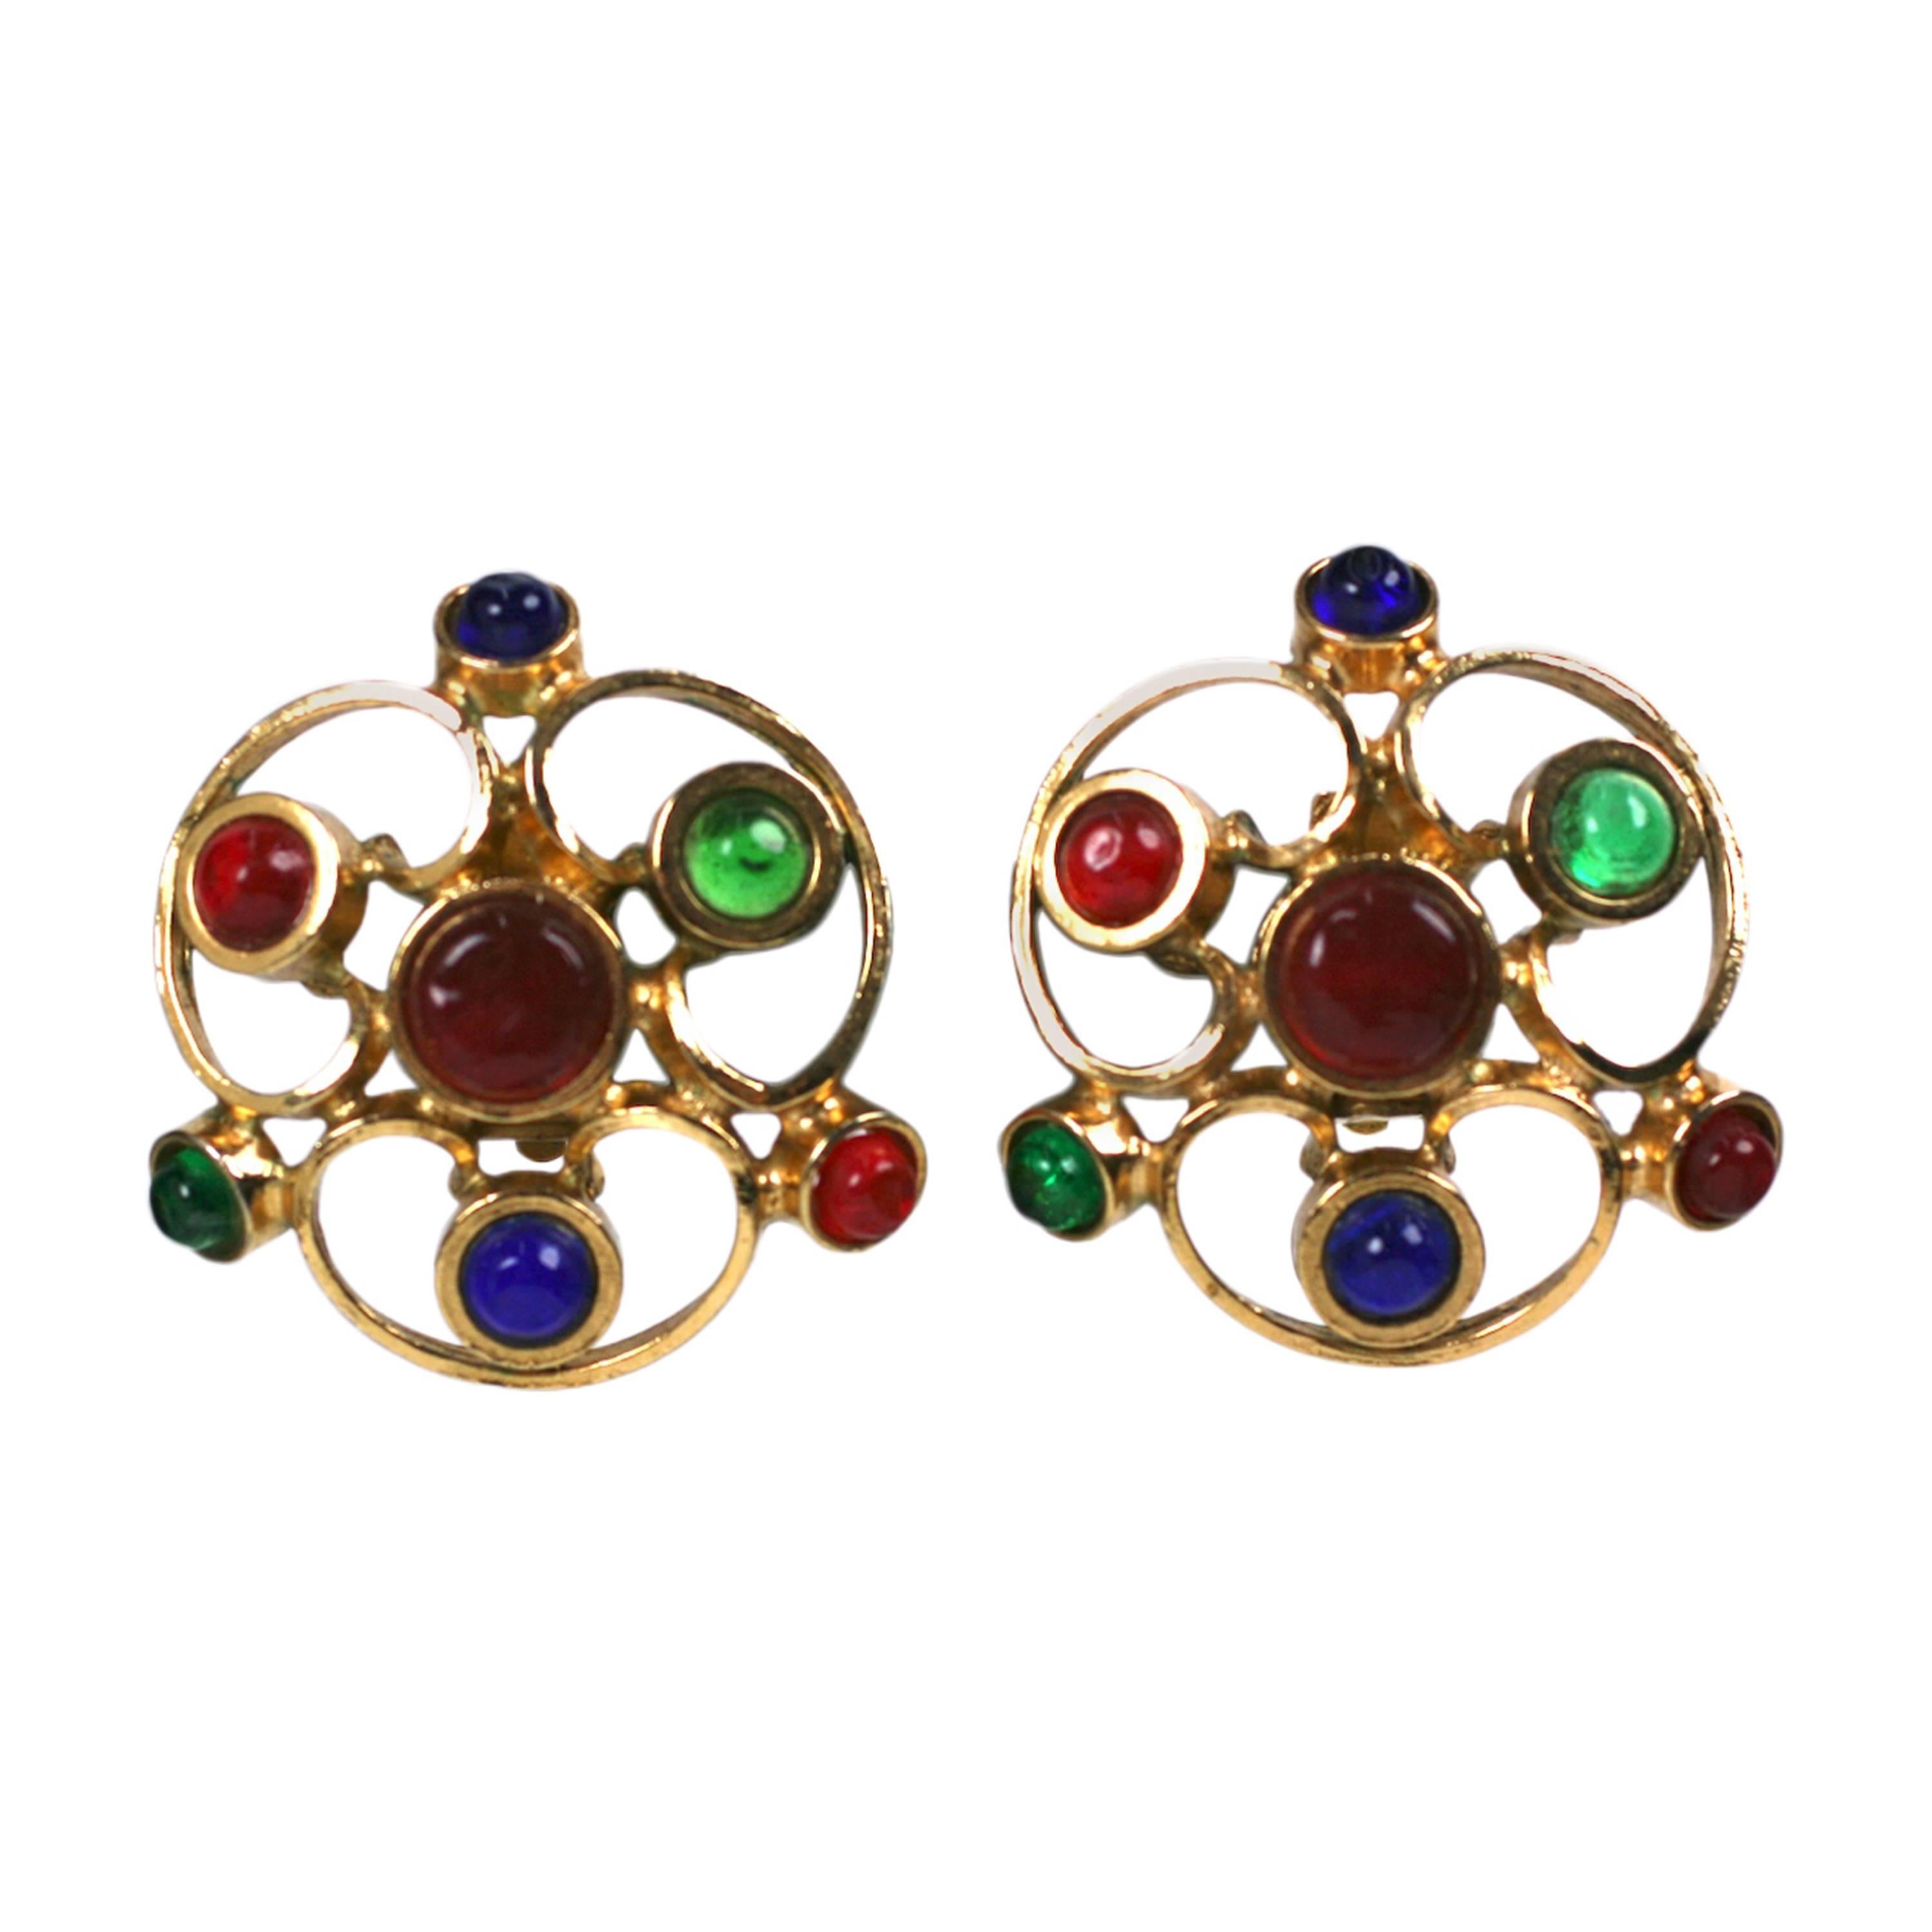  Maison Gripoix for Chanel Large  Medieval Trefoil  Poured Glass   Earclips